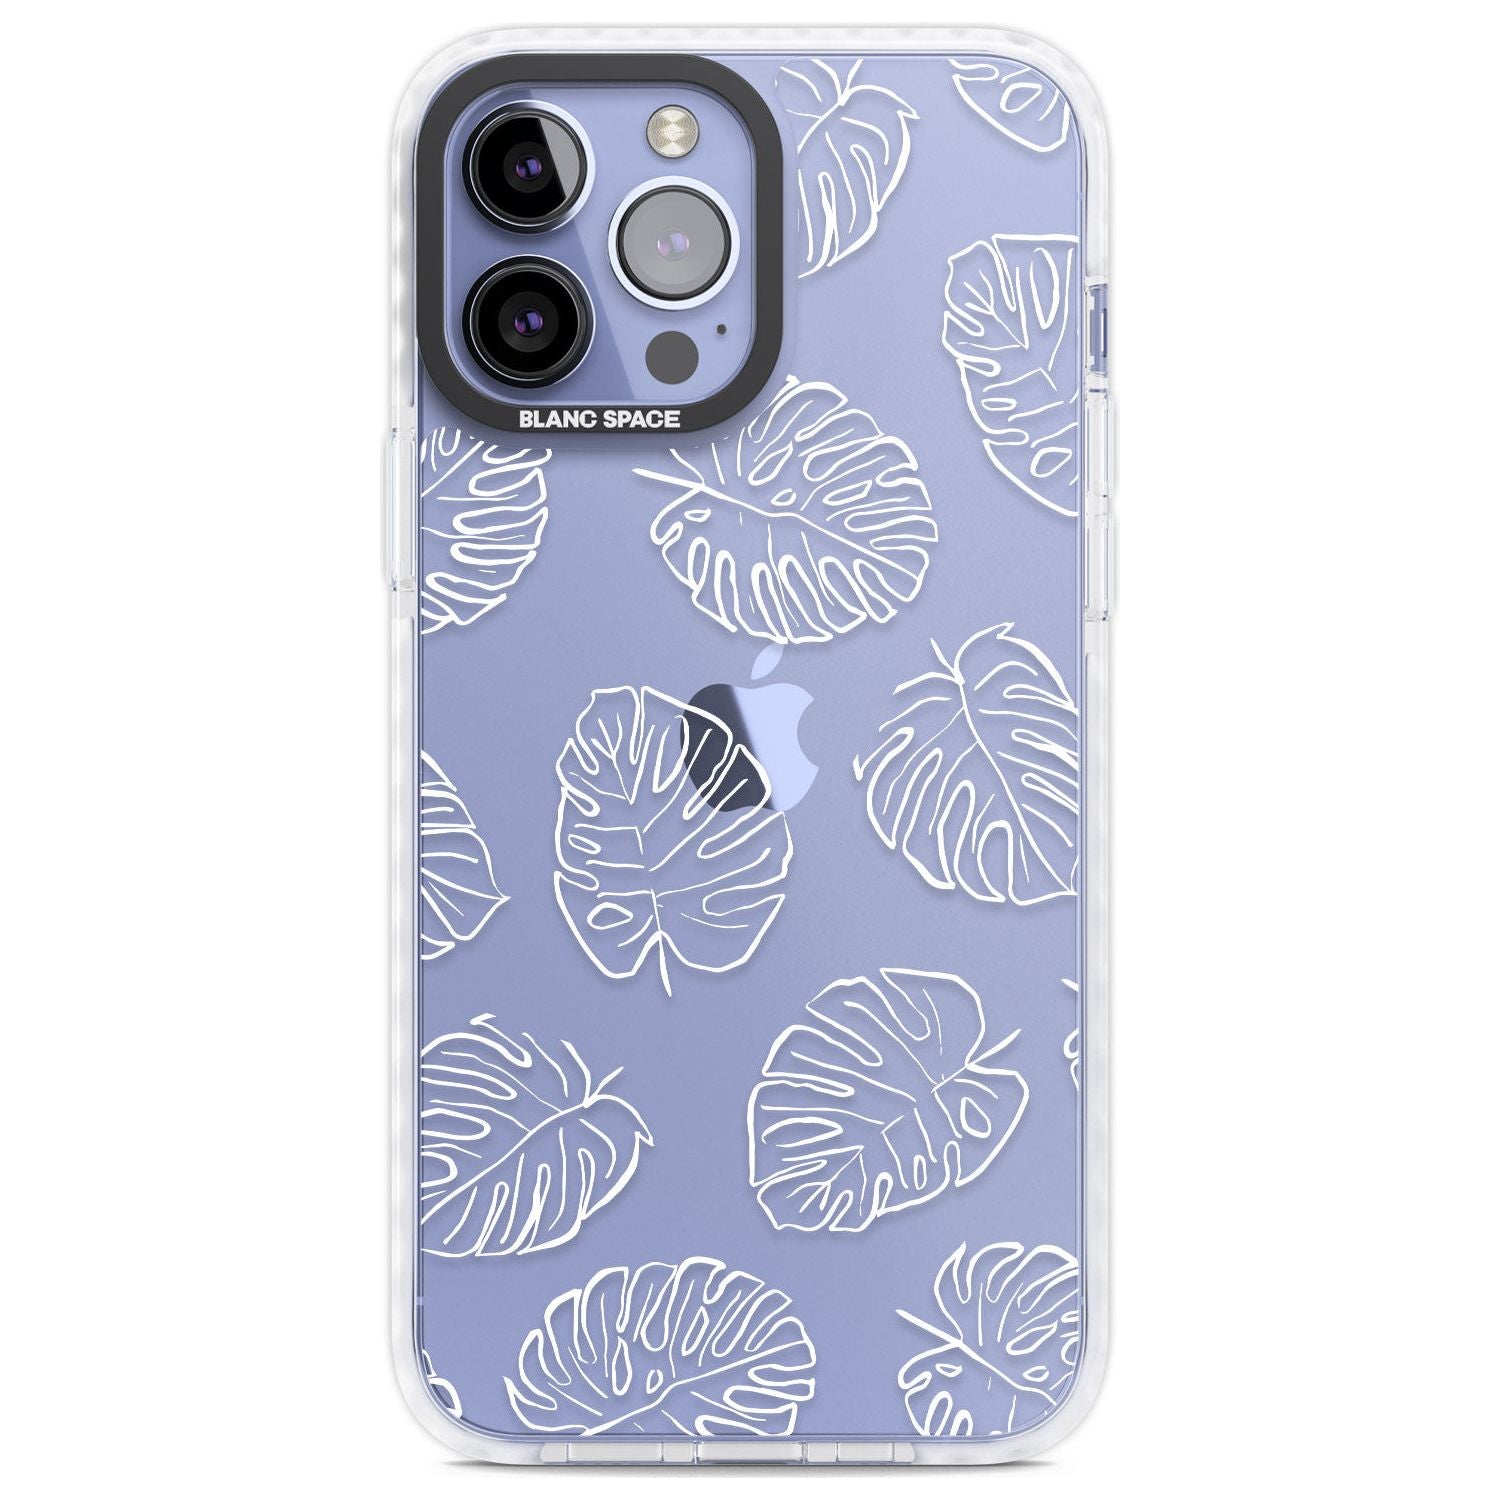 Monstera Leaves Phone Case iPhone 13 Pro Max / Impact Case,iPhone 14 Pro Max / Impact Case Blanc Space